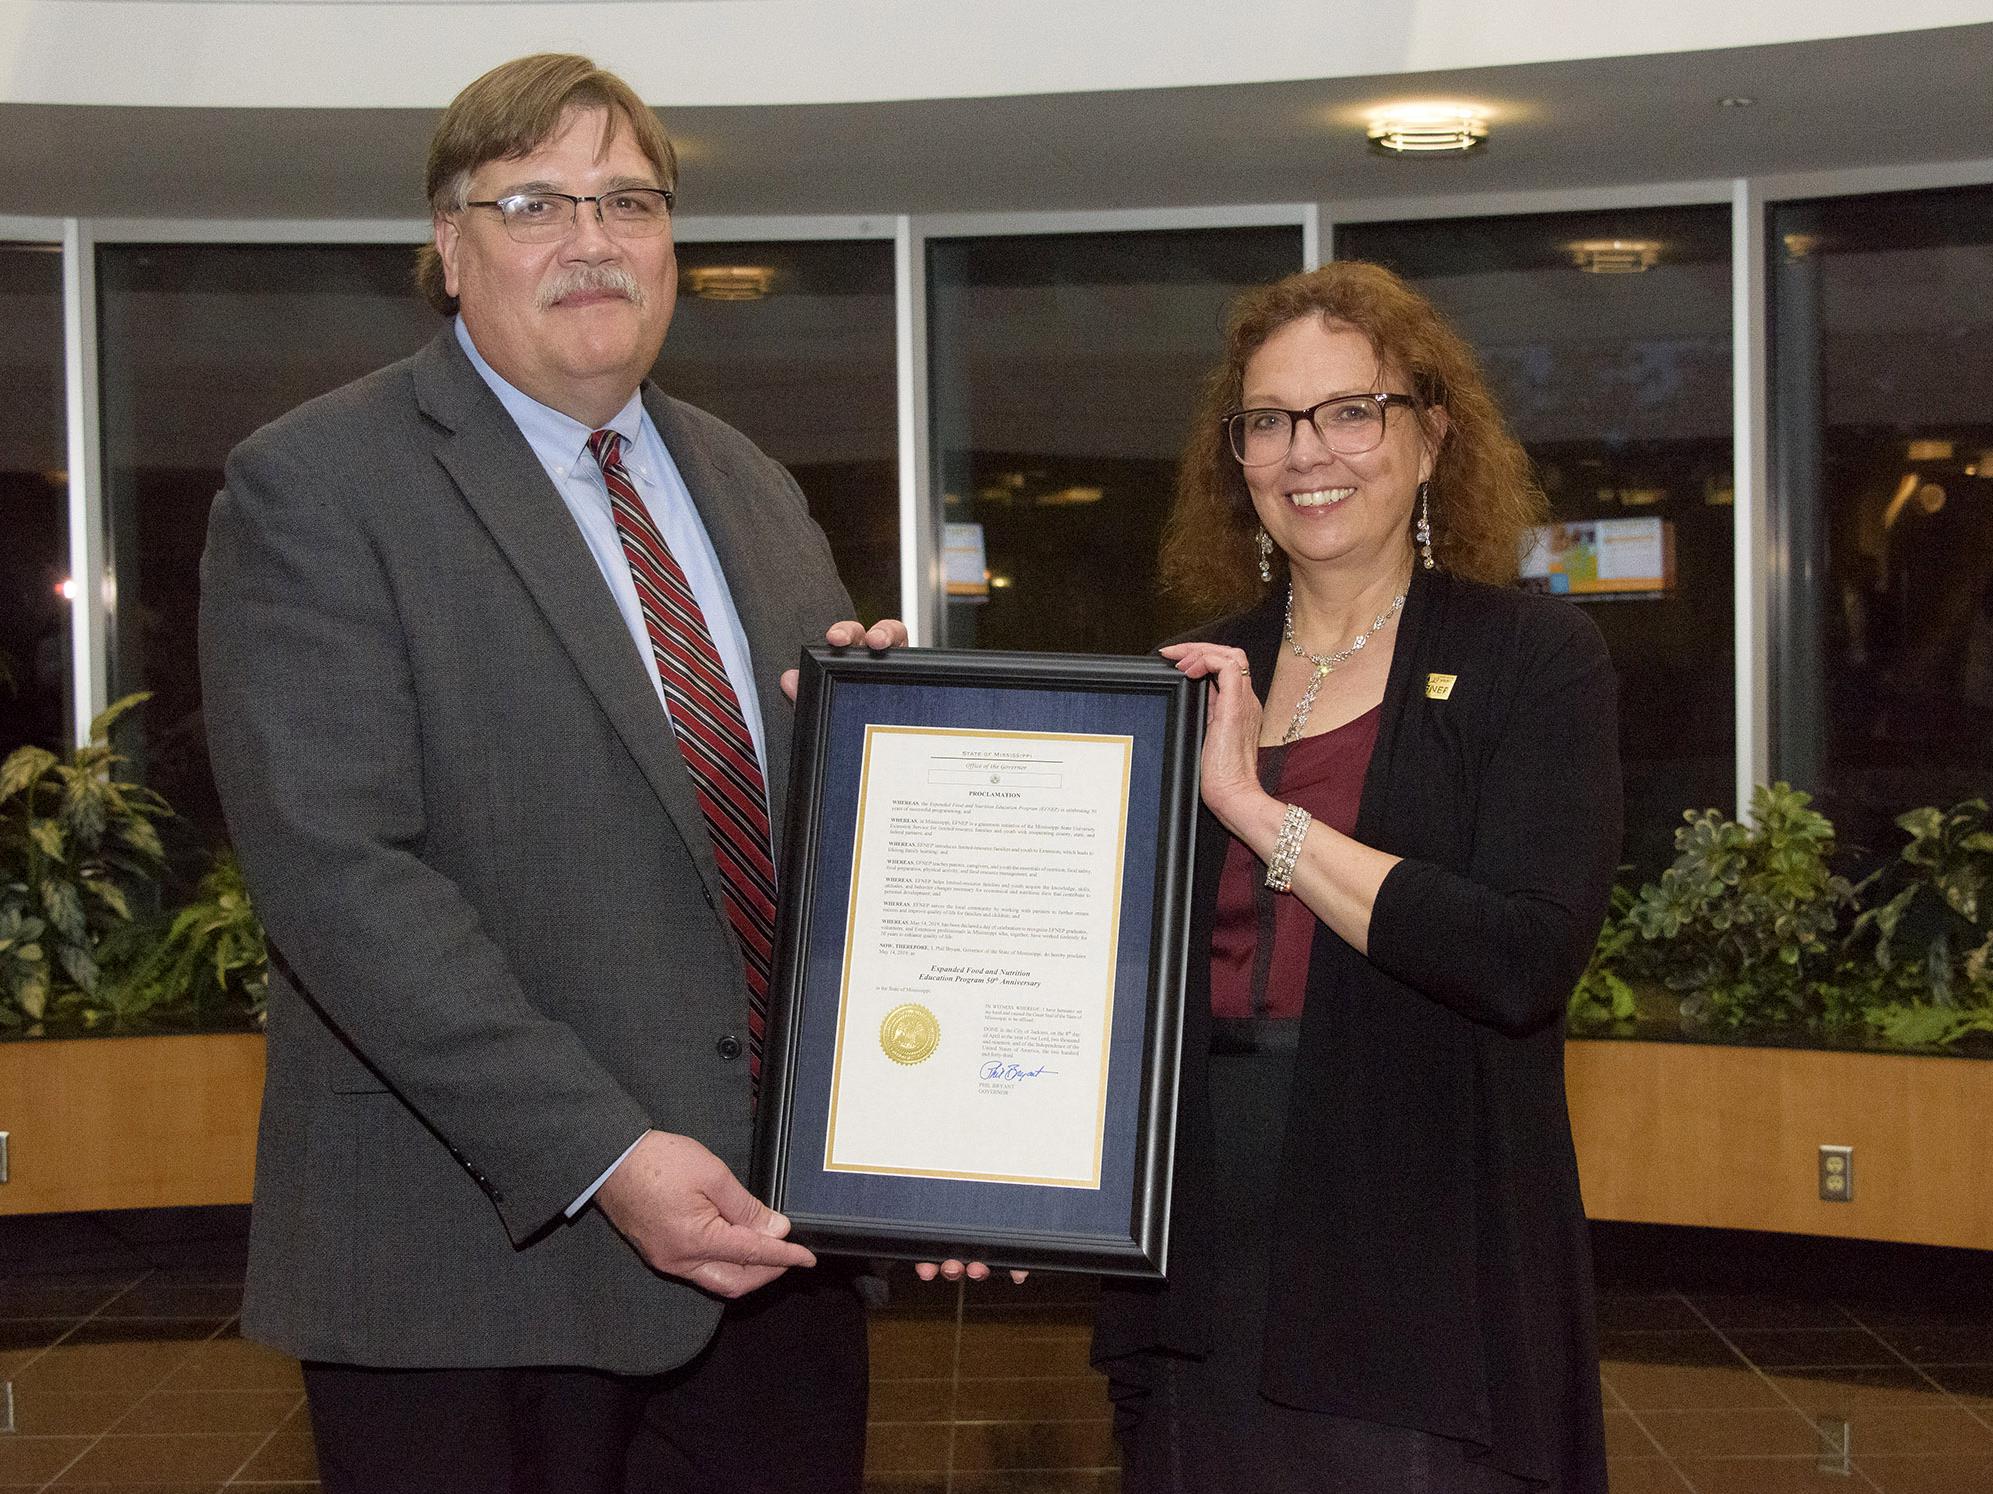 A man on the left and a woman on the right stand in an atrium and hold a framed document with a gold seal.